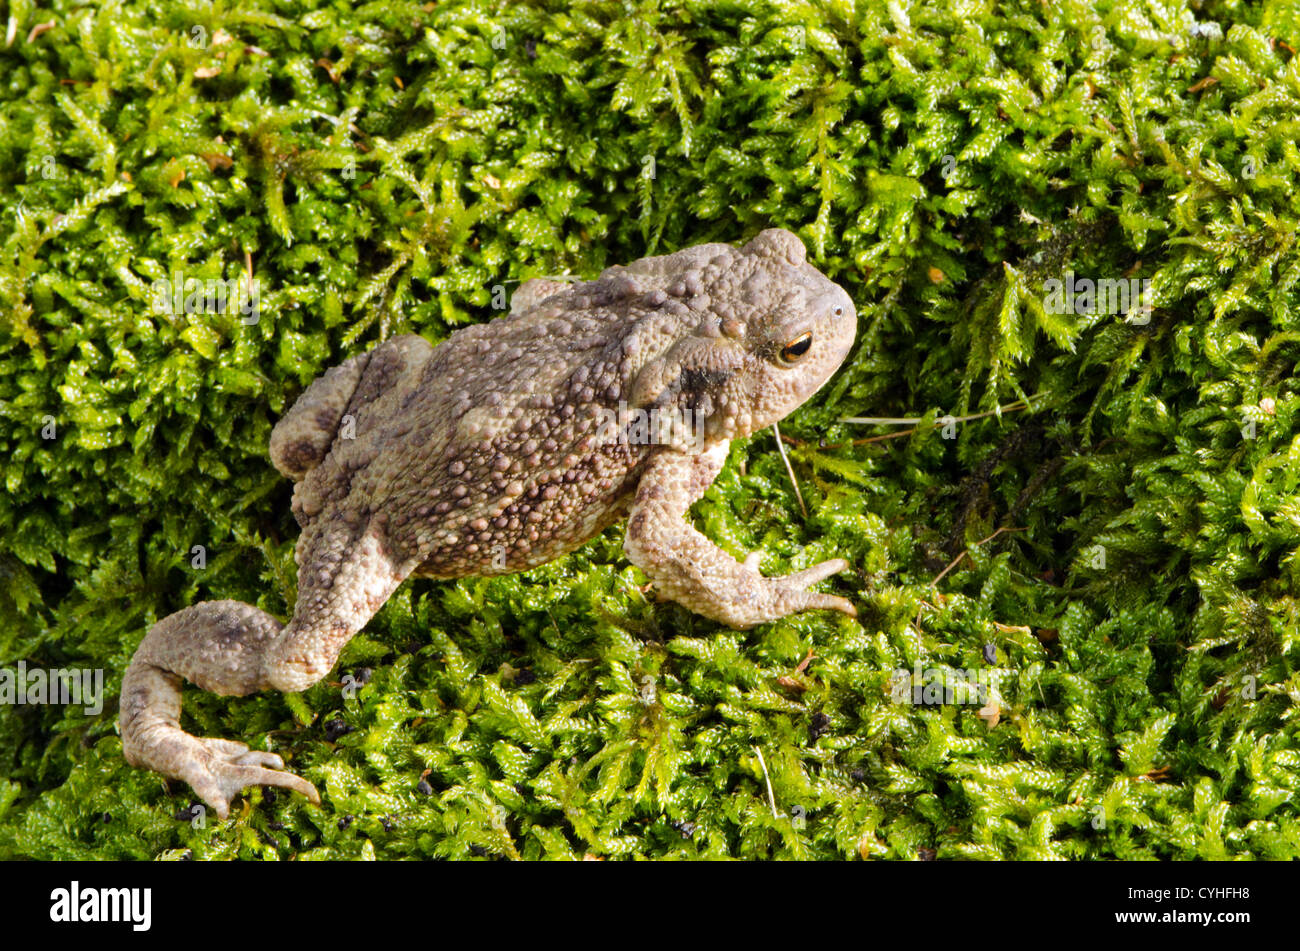 european treu toad bufonidae on mossy ground. Ugly horrible animal sunlight. Stock Photo